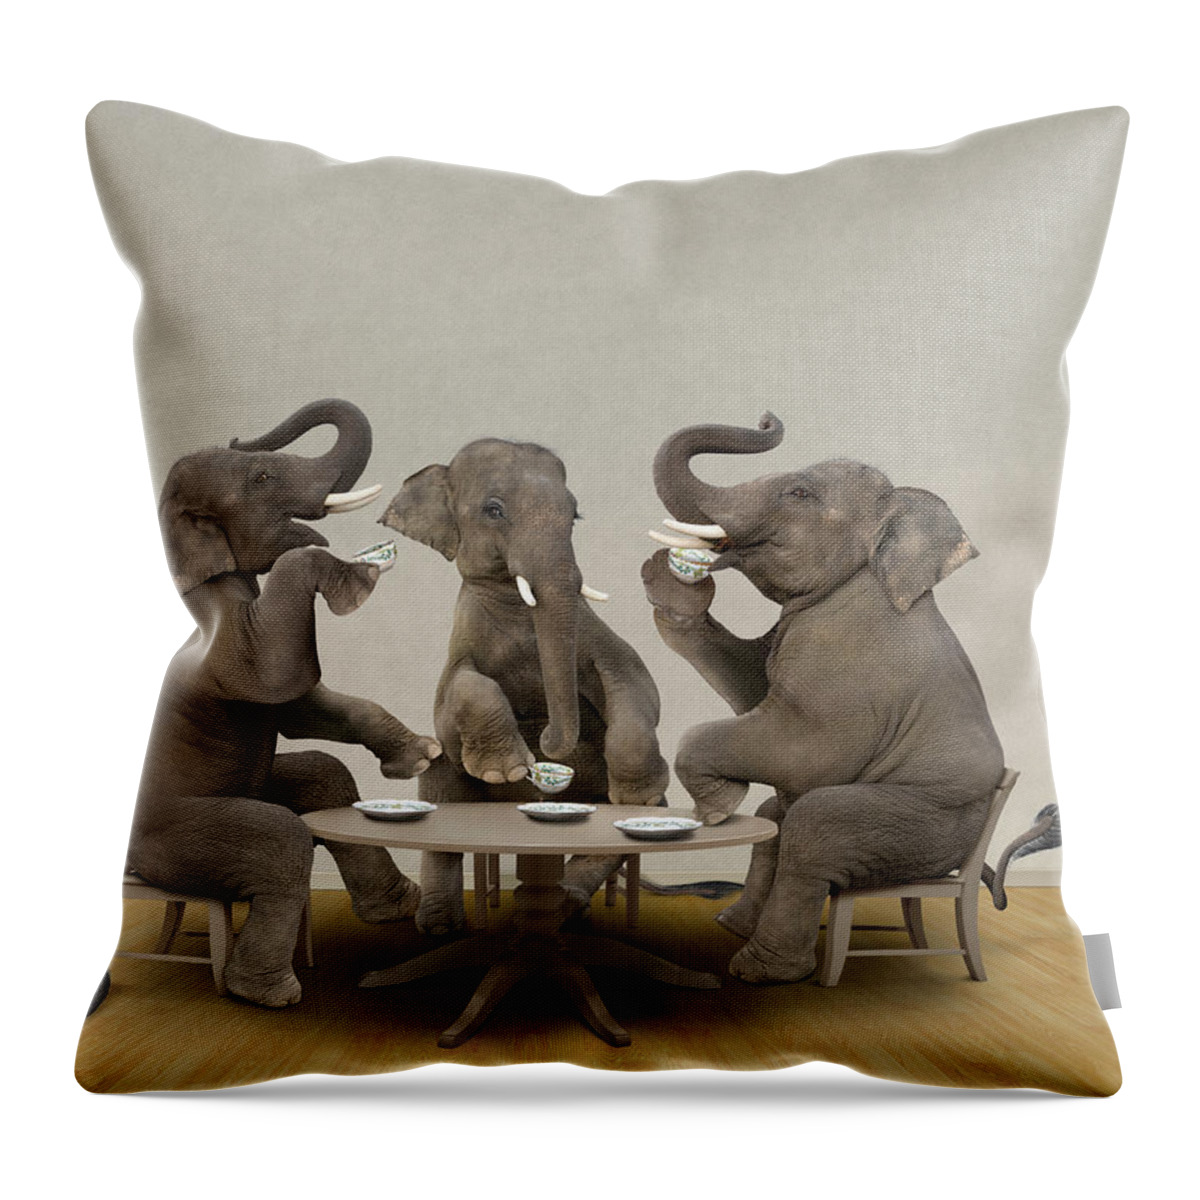 Three Animals Throw Pillow featuring the photograph Elephants Having Tea Party by John M Lund Photography Inc